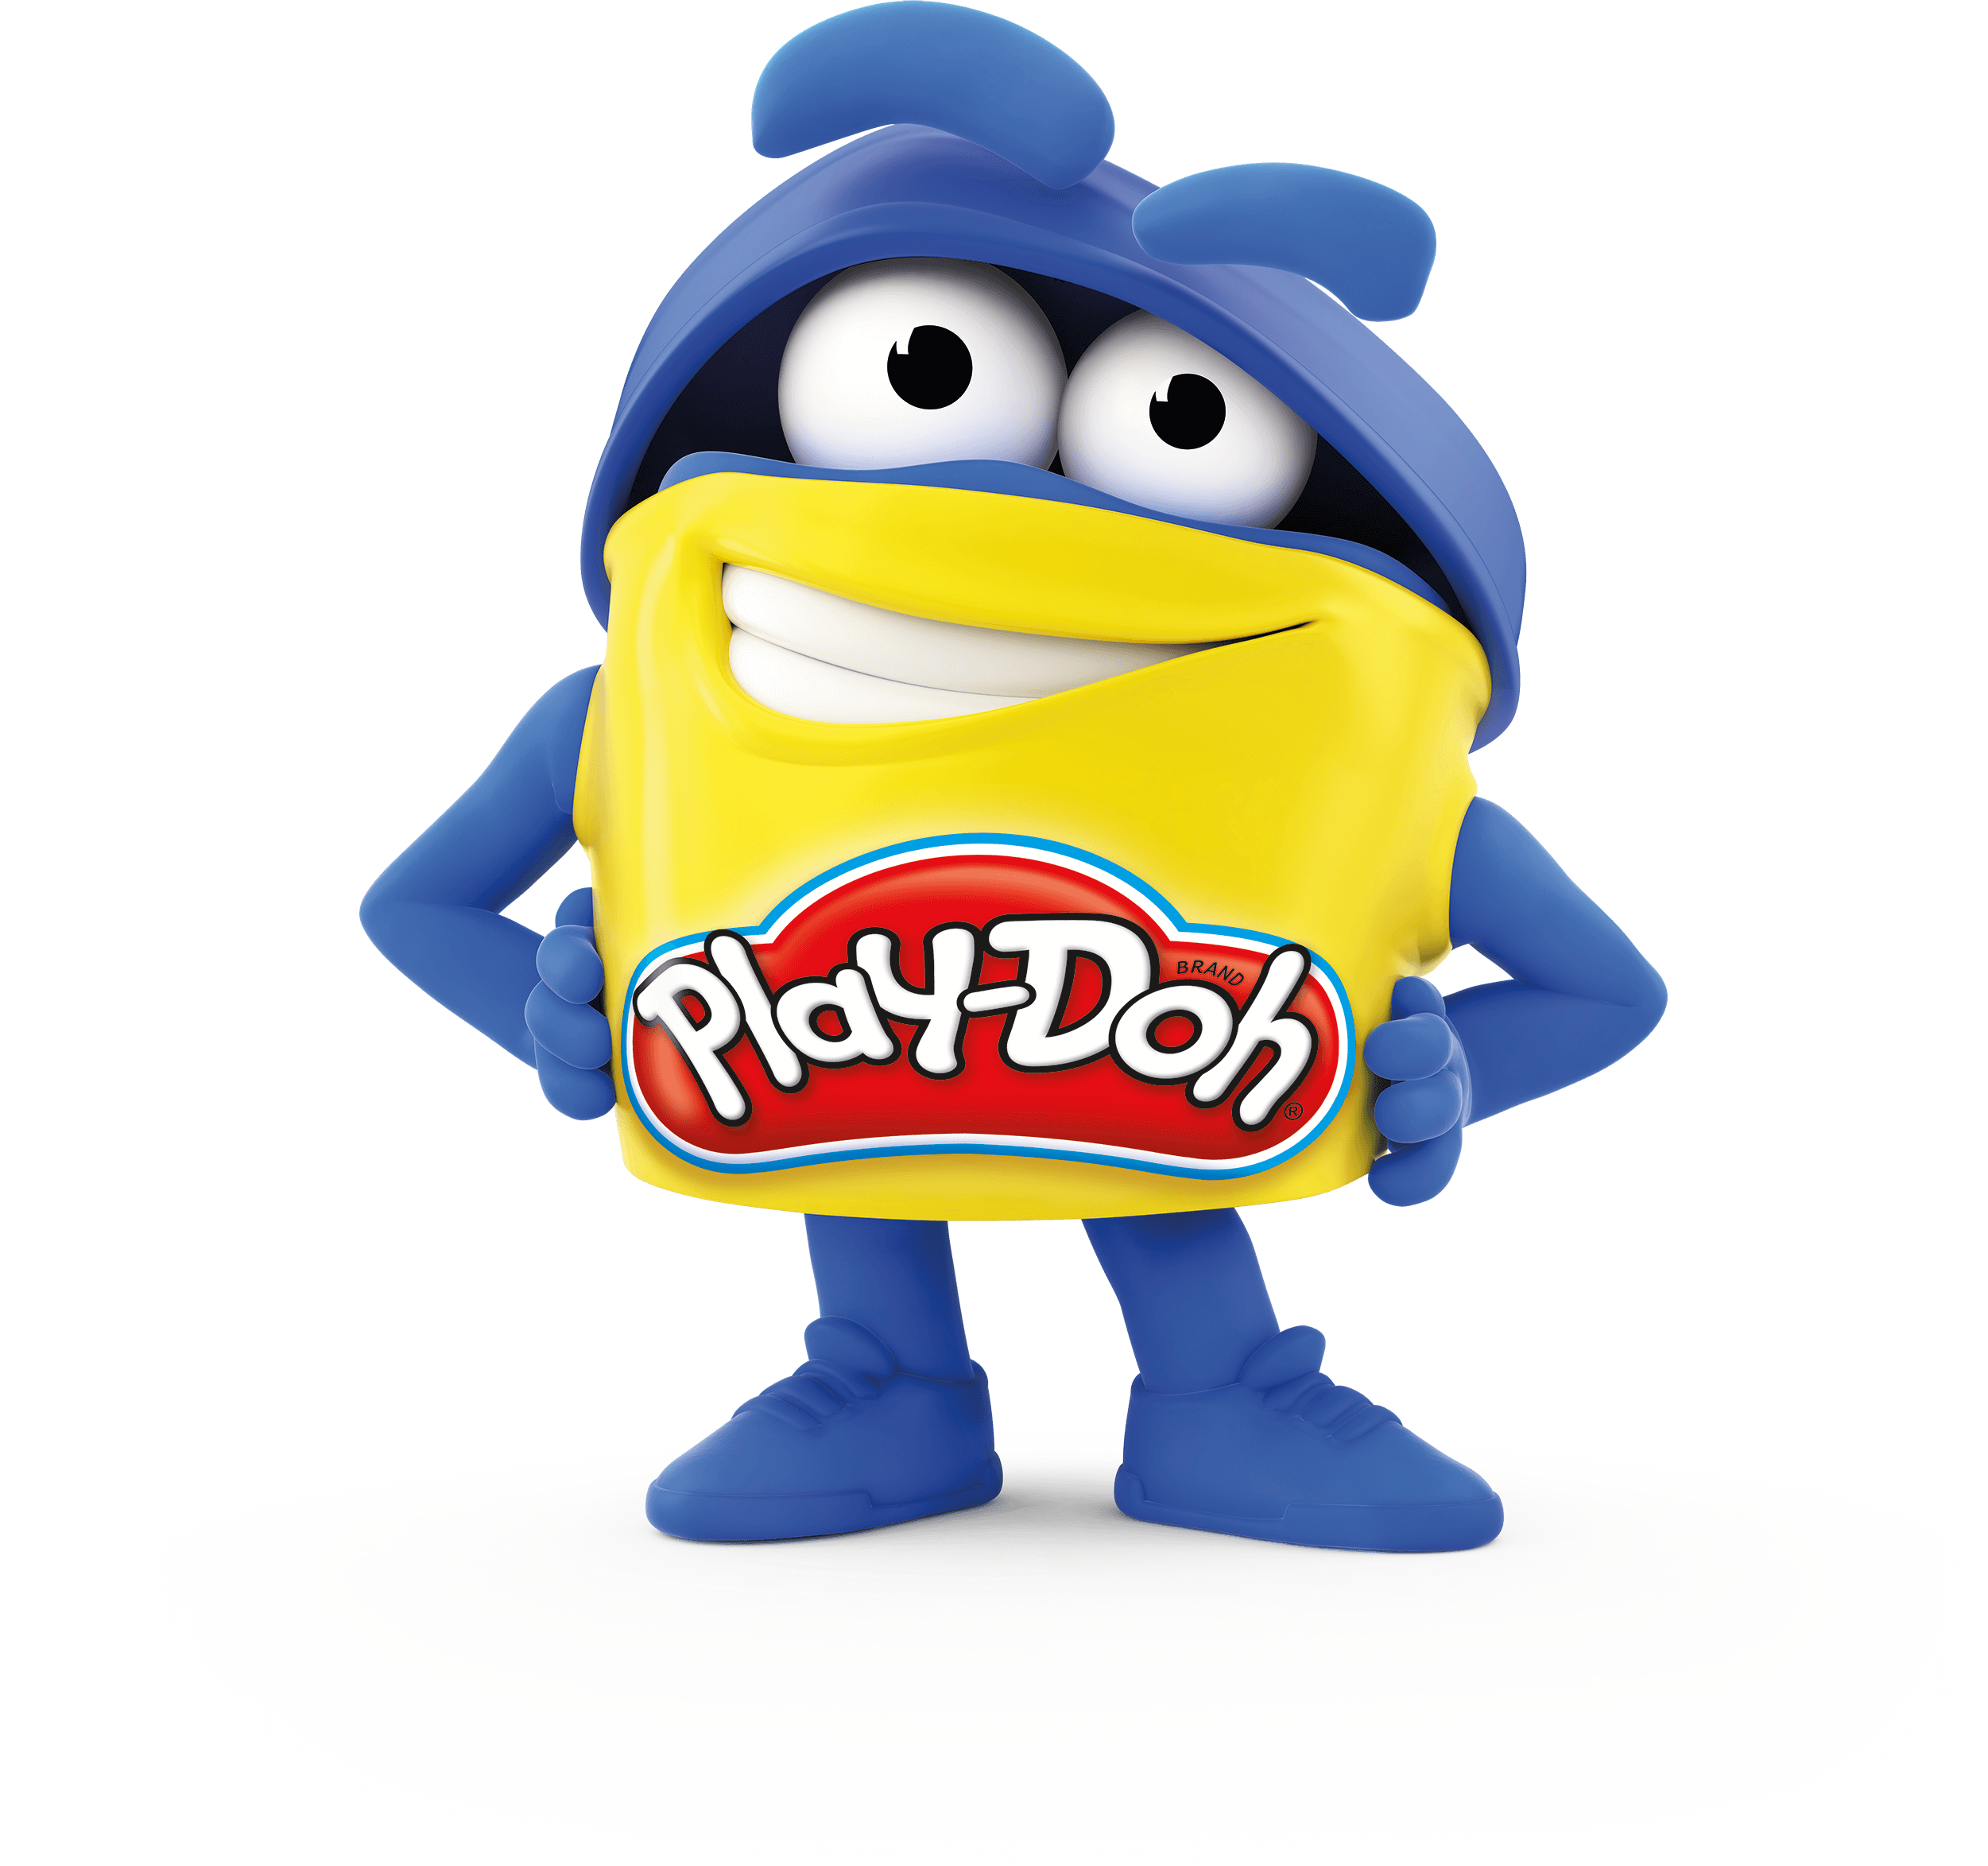 A Cartoon Character Holding A Yellow And Blue Object